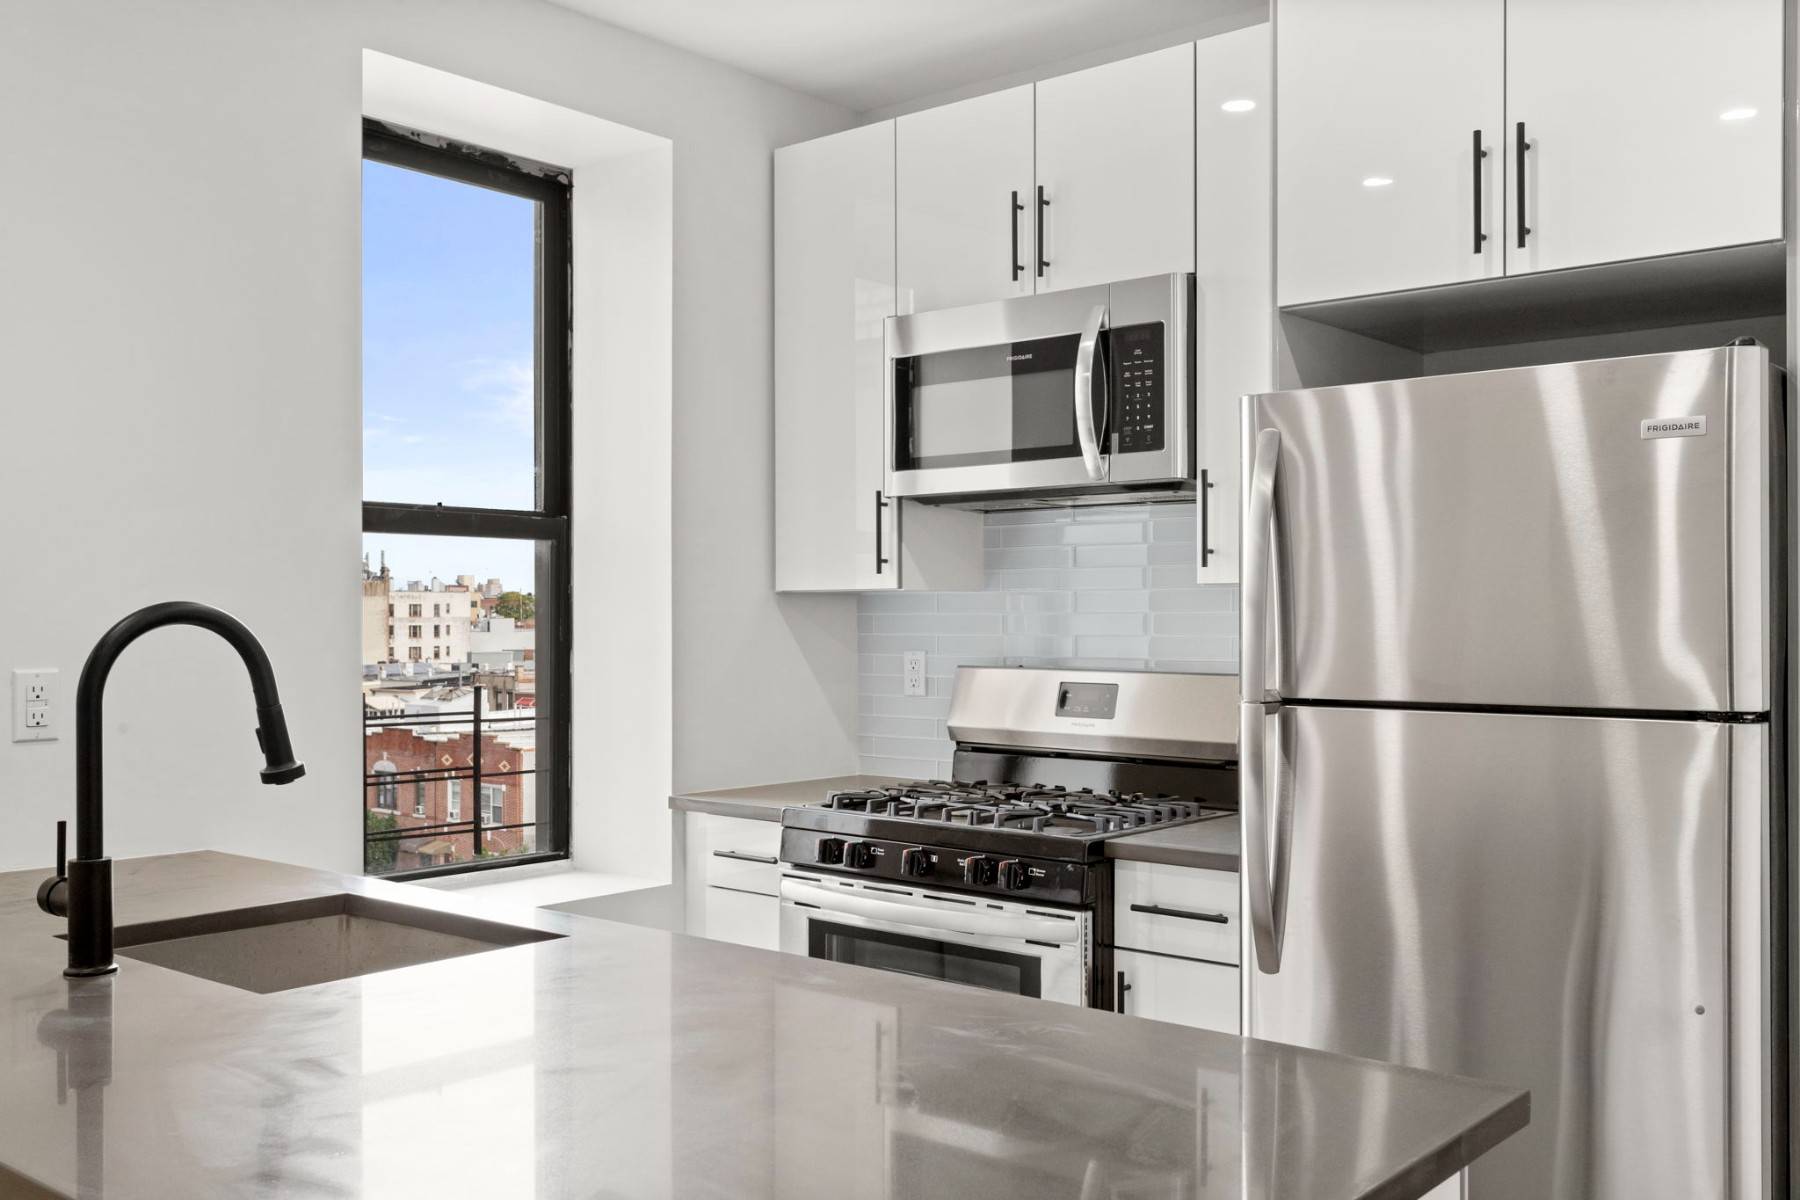 Welcome to Astoria33, the newest pre war condominium conversion project in one of the citys most vibrant communities.